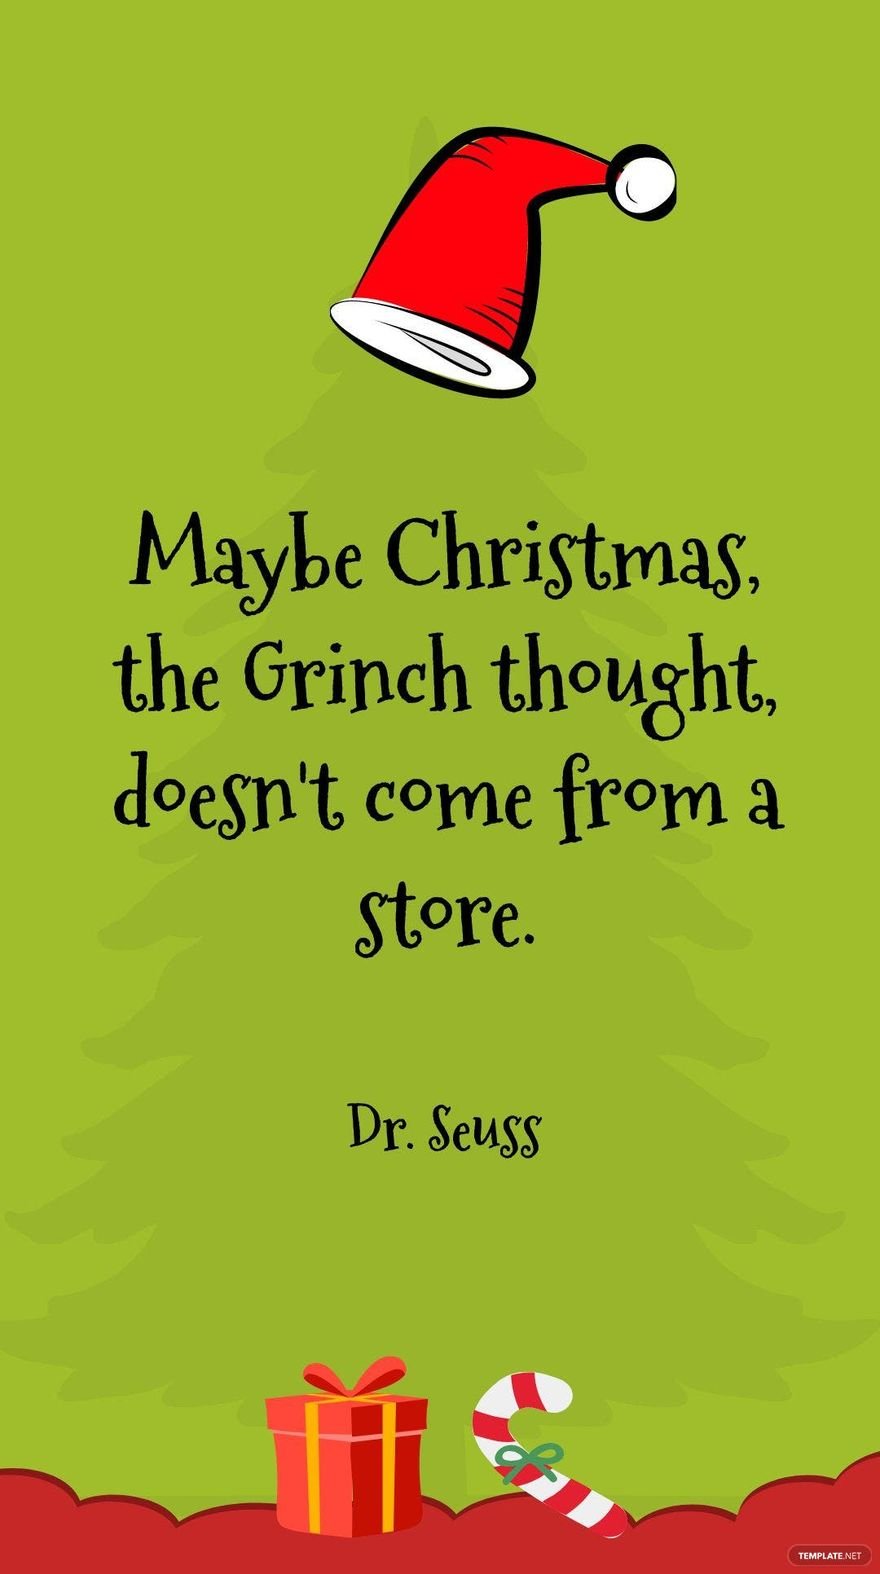 Dr. Seuss - Maybe Christmas, the Grinch thought, doesn't come from a store. in JPG